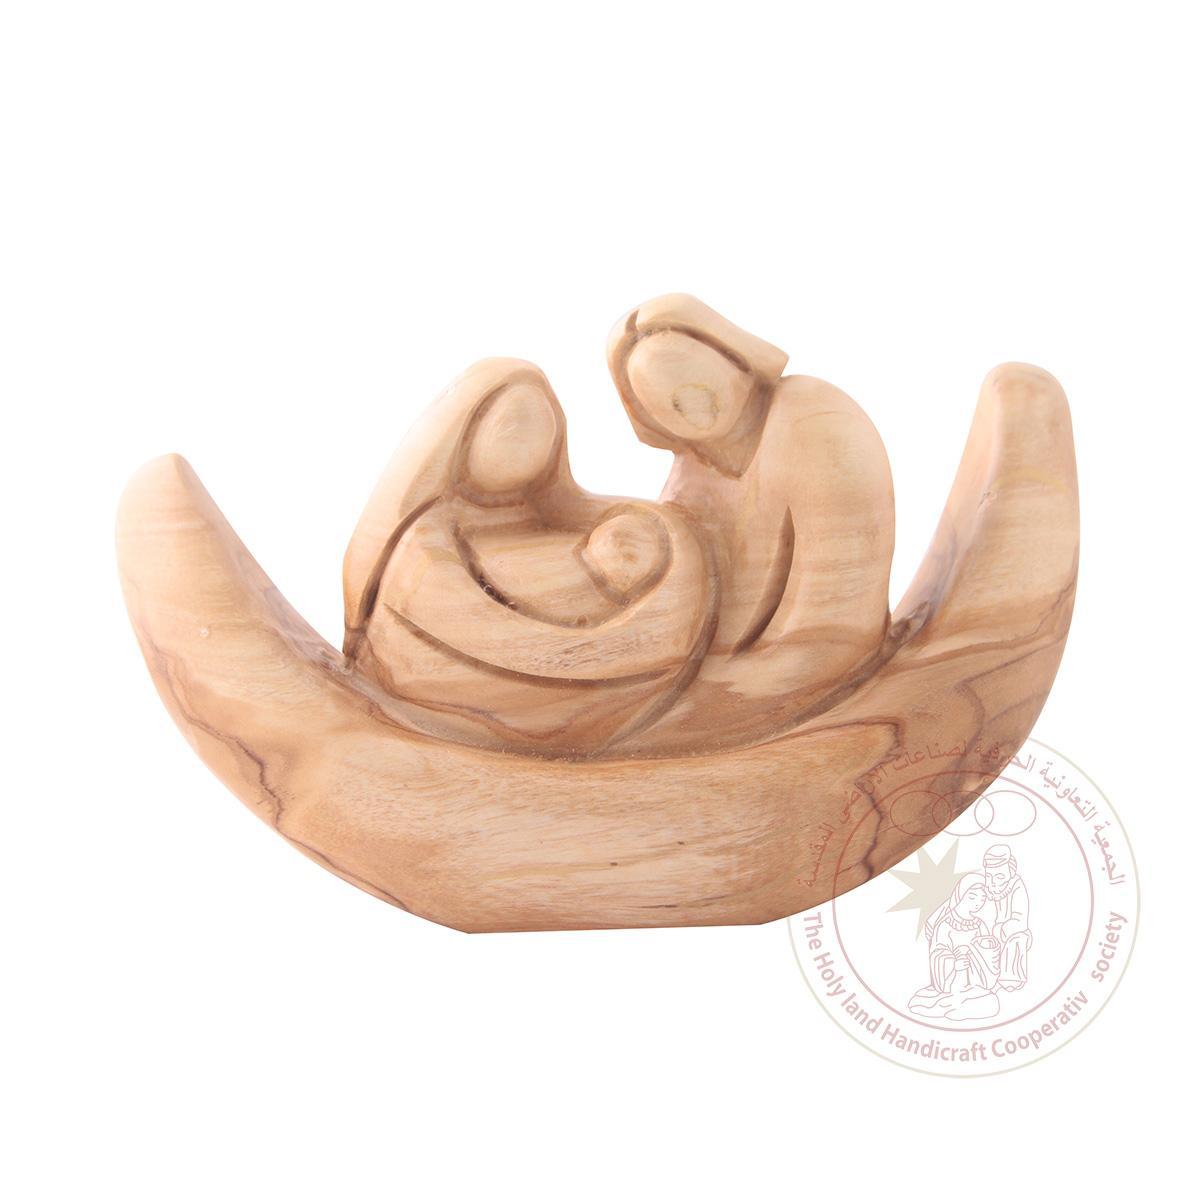 The Holy Family in a Boat - Olive Wood Figurine, Smooth Plain Features